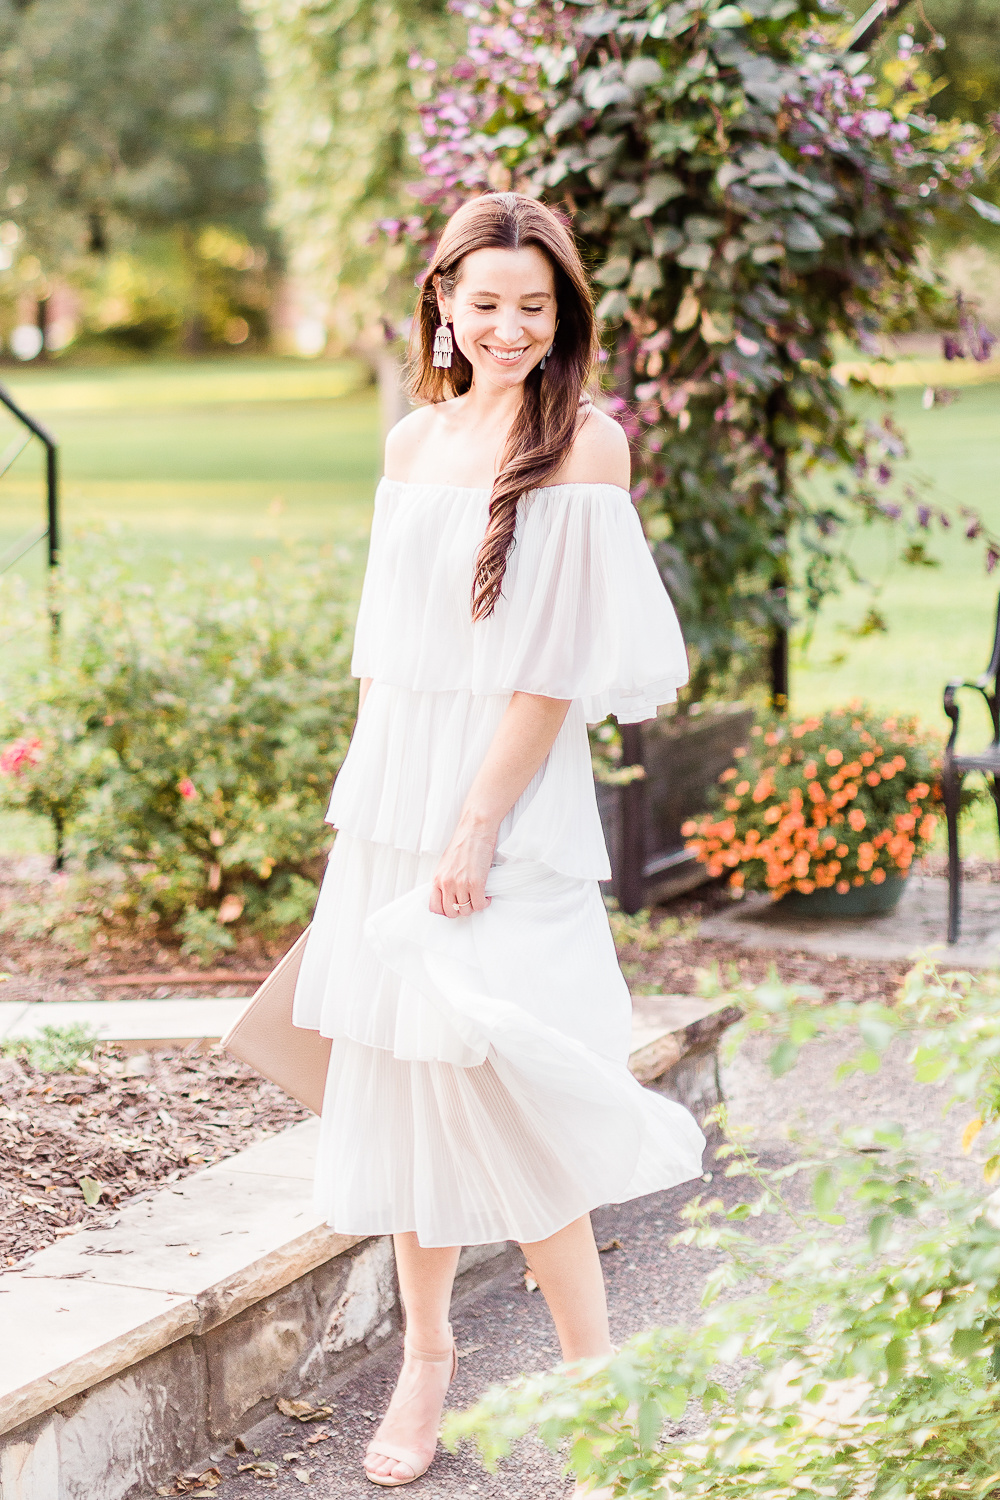 Budget-Friendly Bridal Shower Dress for the Bride-to-Be by affordable fashion blogger Stephanie Ziajka on Diary of a Debutante, Amazon ETCYY Off the Shoulder Ruffle Chiffon Dress styled with Amazon Heels Charm nude chunky block sandals, fall LWD outfit